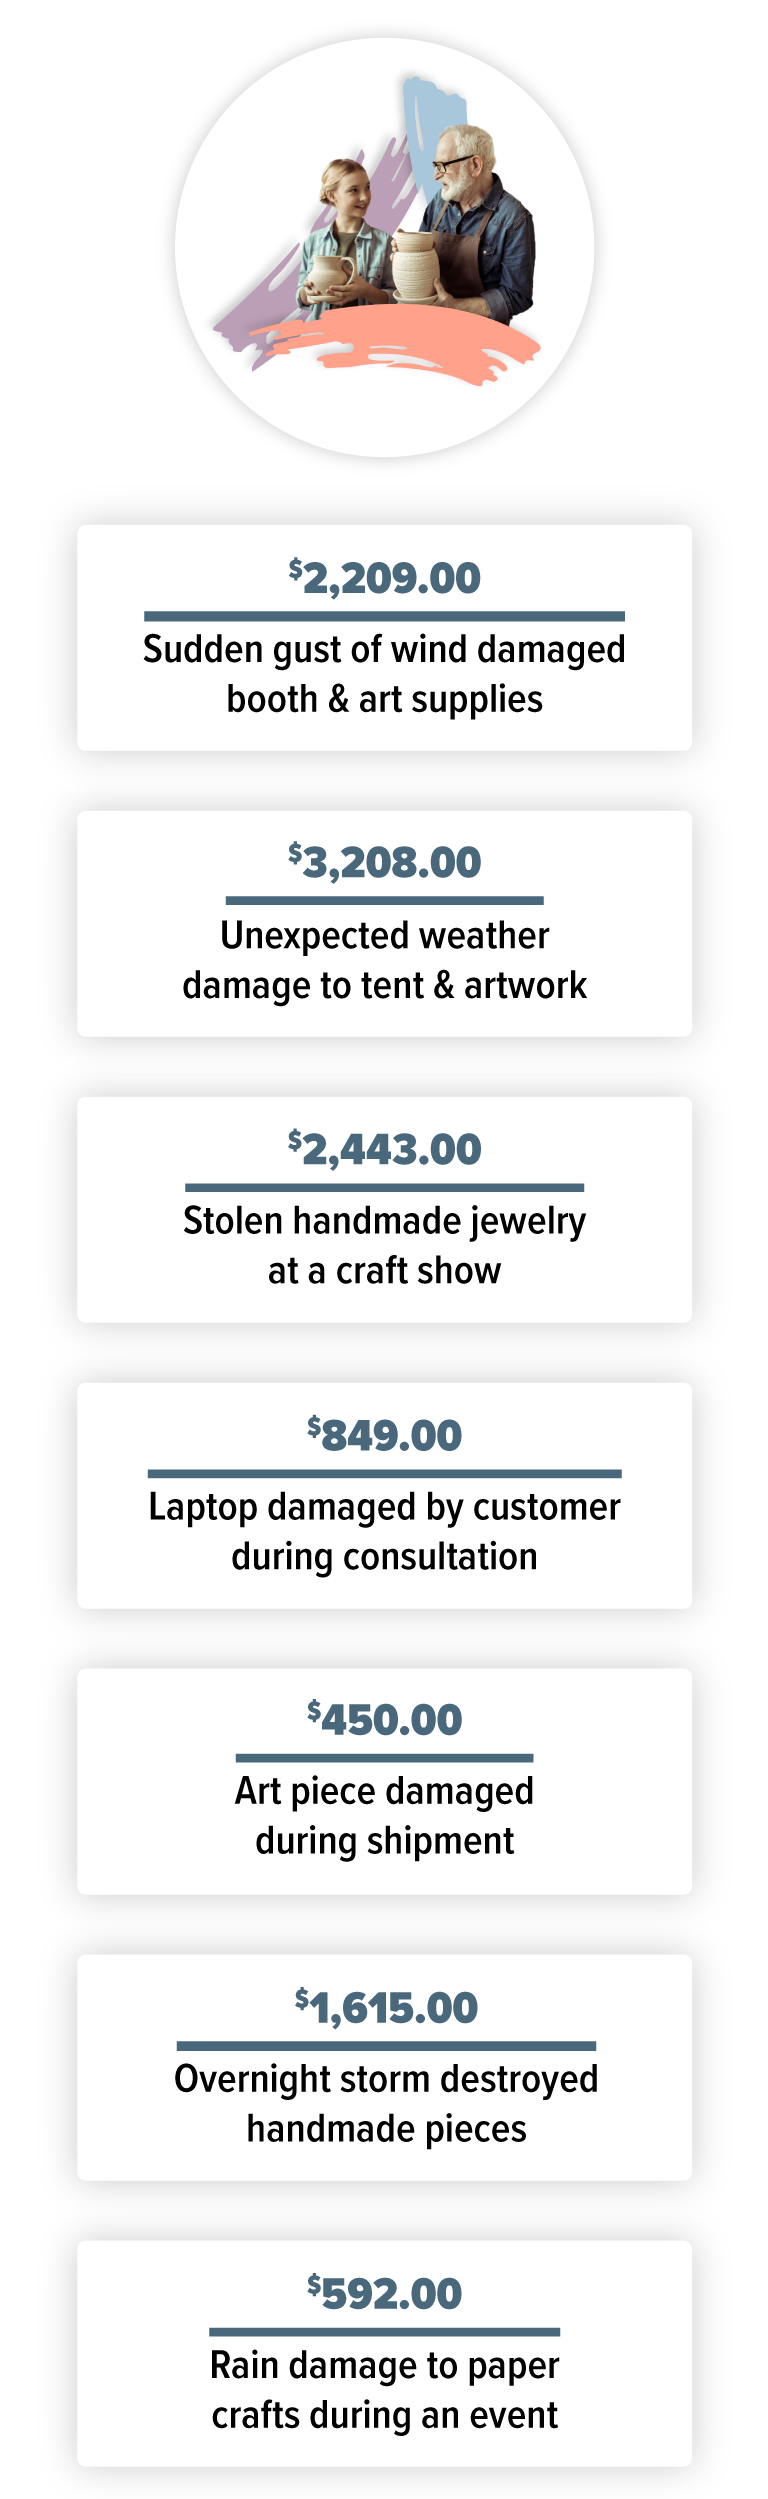 Rain damage to paper crafts during an event = $592.00 Unexpected weather damage to tent & artwork = $3,208.00 Overnight storm destroyed handmade pieces = $1,615.00 Sudden gust of wind damaged booth & art supplies = $2,209.00 Laptop damaged by customer during consultation = $849.00 Stolen handmade jewelry at a craft show = $2,443.00 Art piece damaged during shipment = $450.00